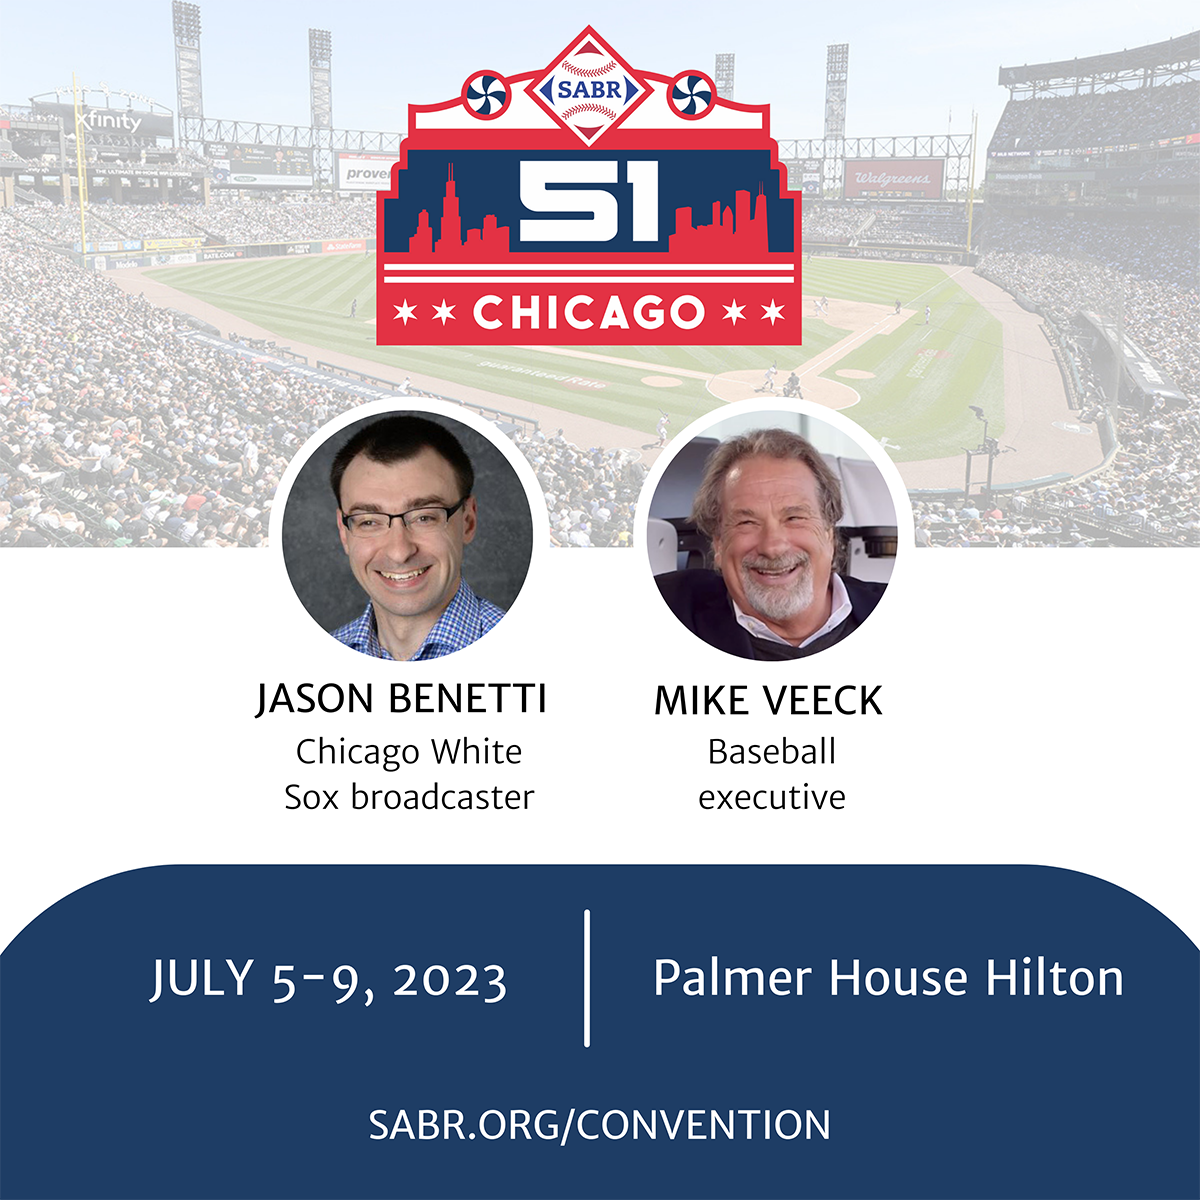 SABR 51 featured speakers: Jason Benetti of the Chicago White Sox and baseball executive Mike Veeck